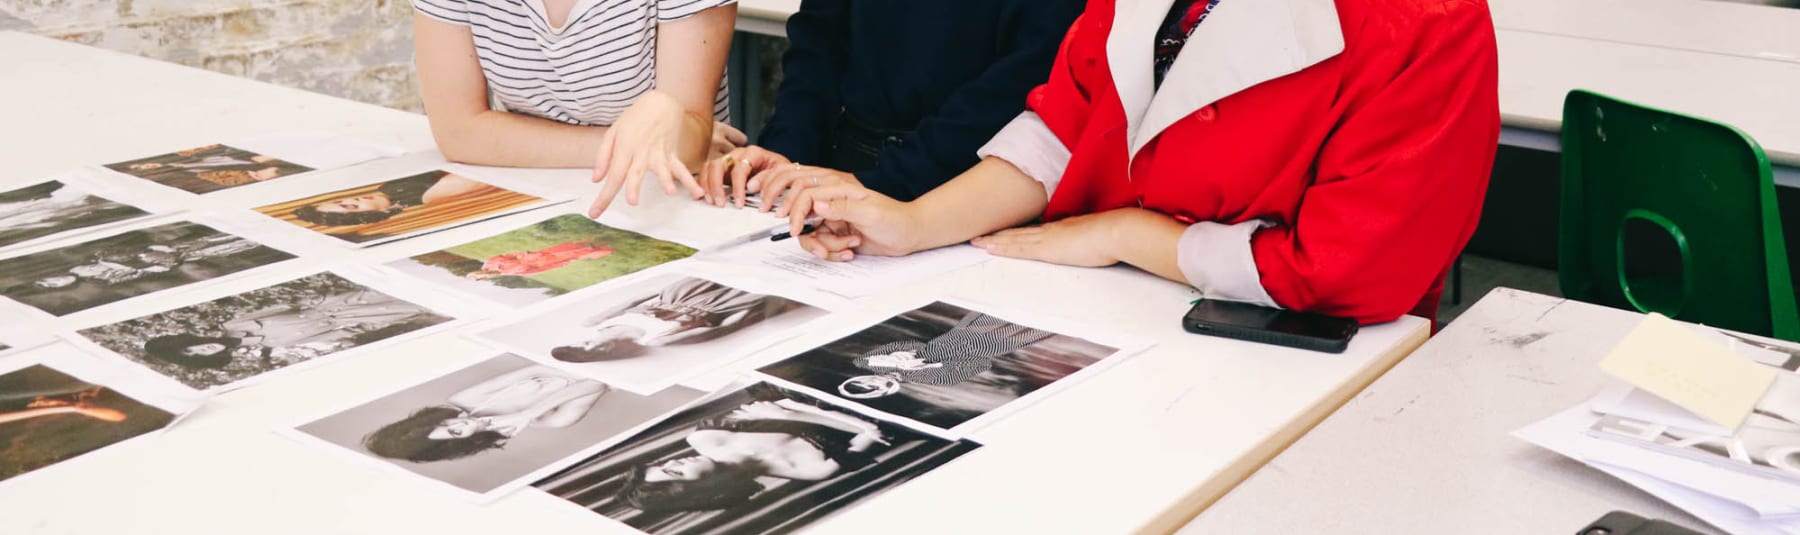 Students sat down with fashion photos